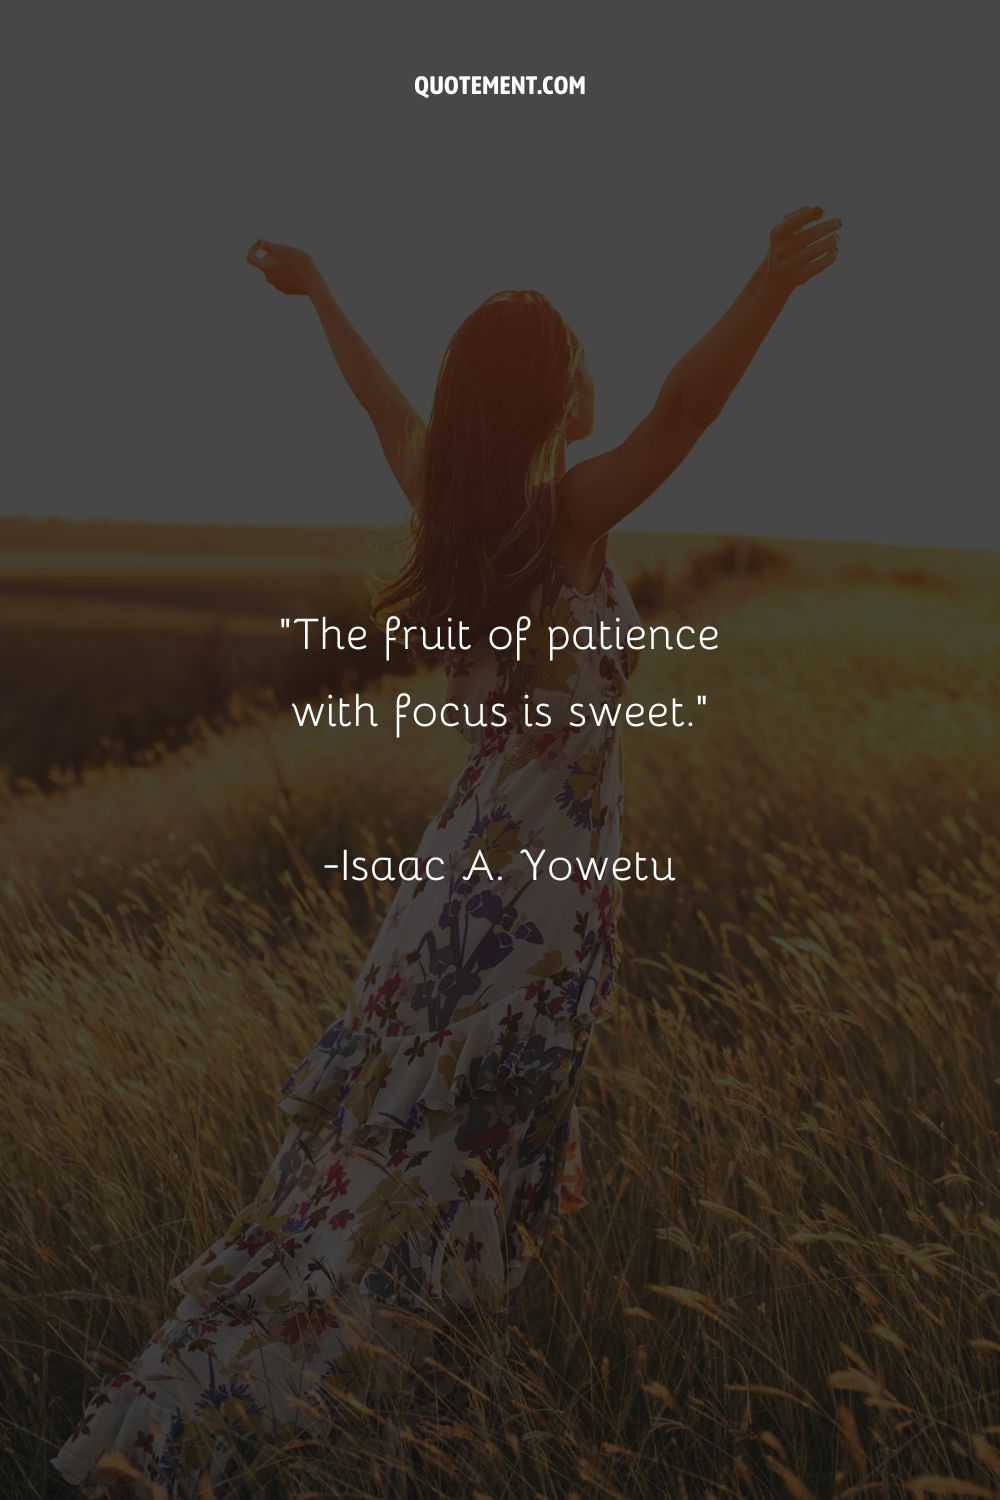 The fruit of patience with focus is sweet.